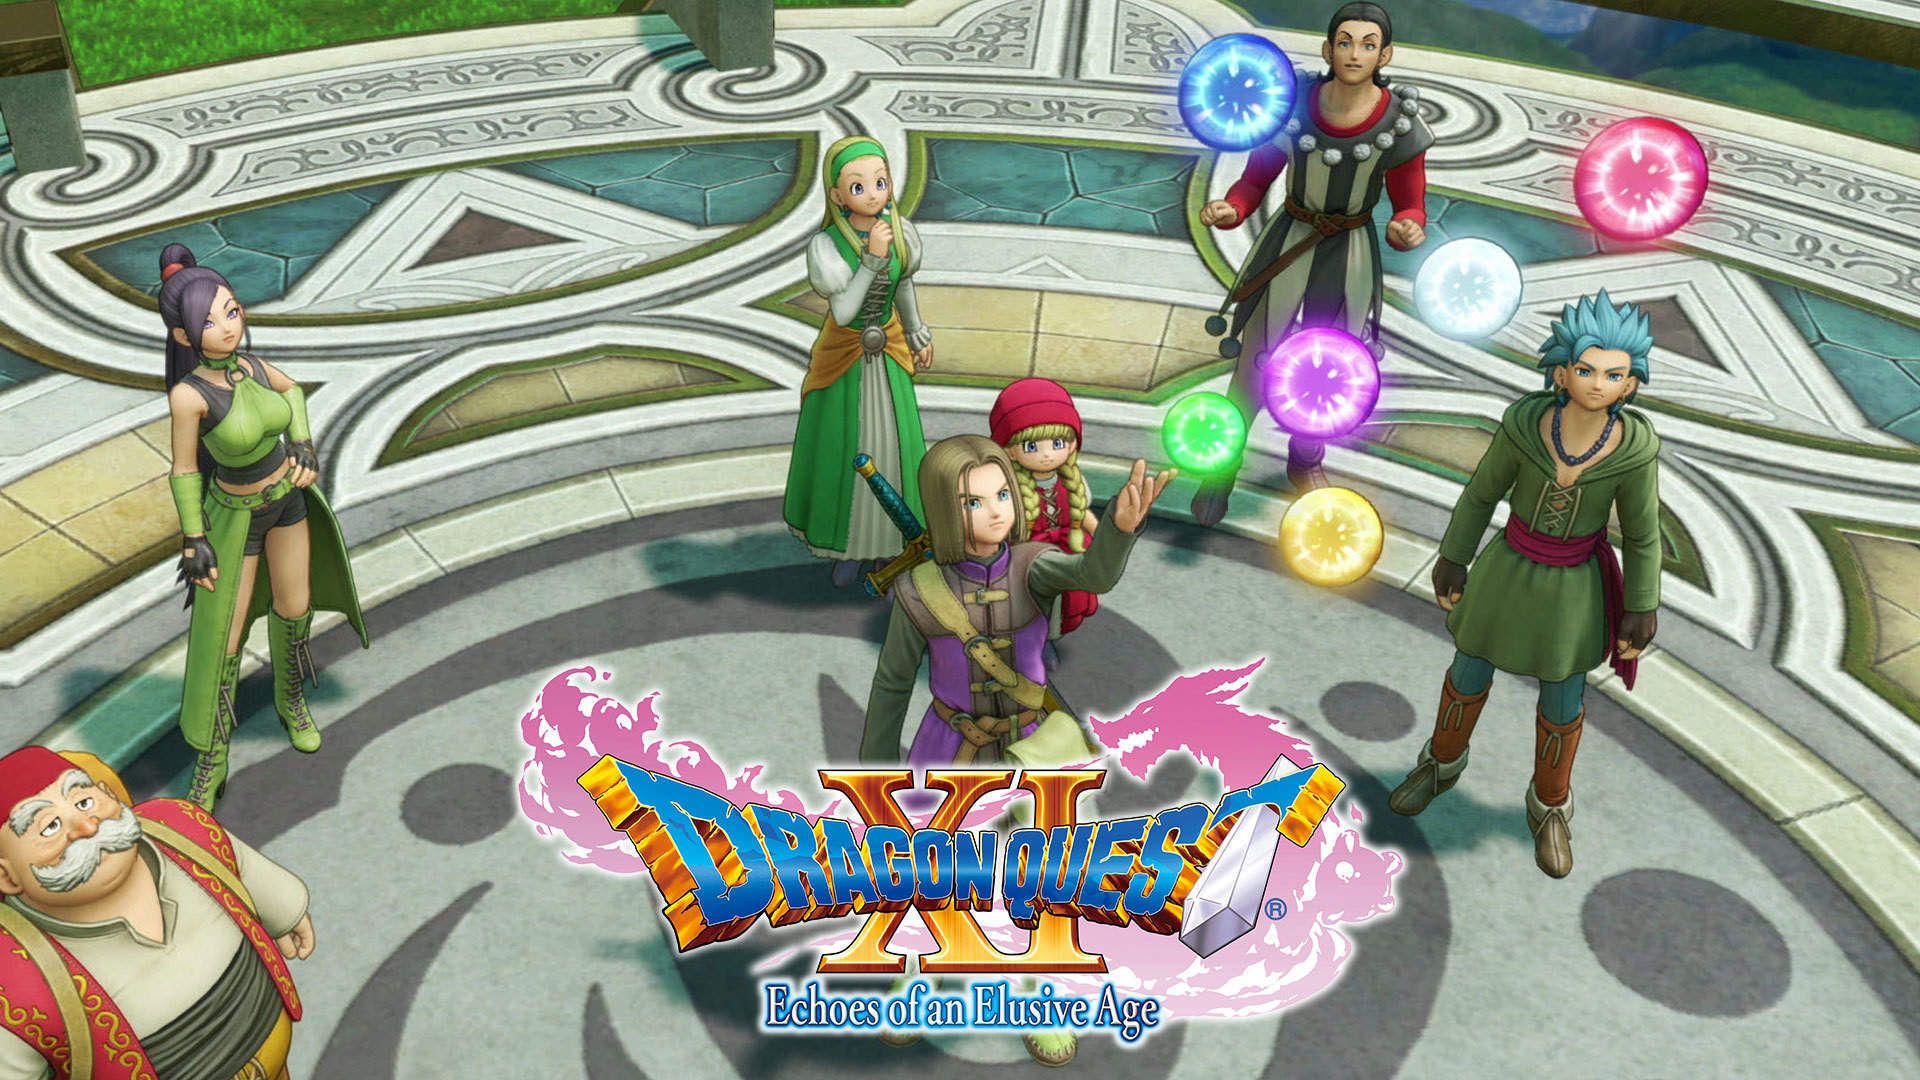 DRAGON QUEST XI: ECHOES OF AN ELUSIVE AGE SHIPS OVER 4 MILLION COPIES GLOBALLY